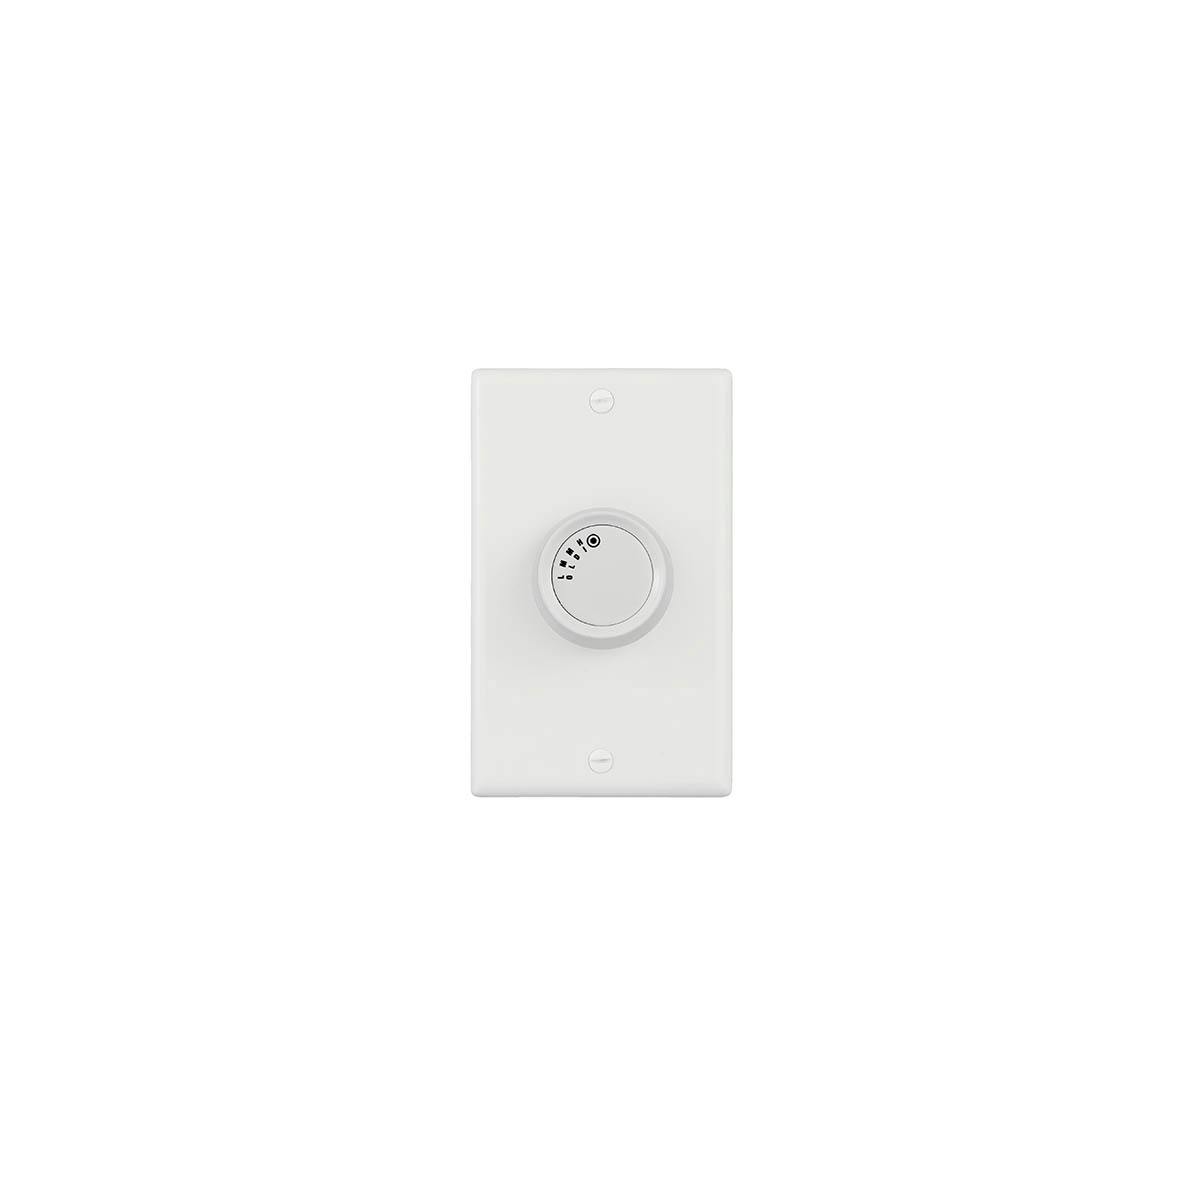 4 Speed Wall Control Rotary 5 Amp on a white background